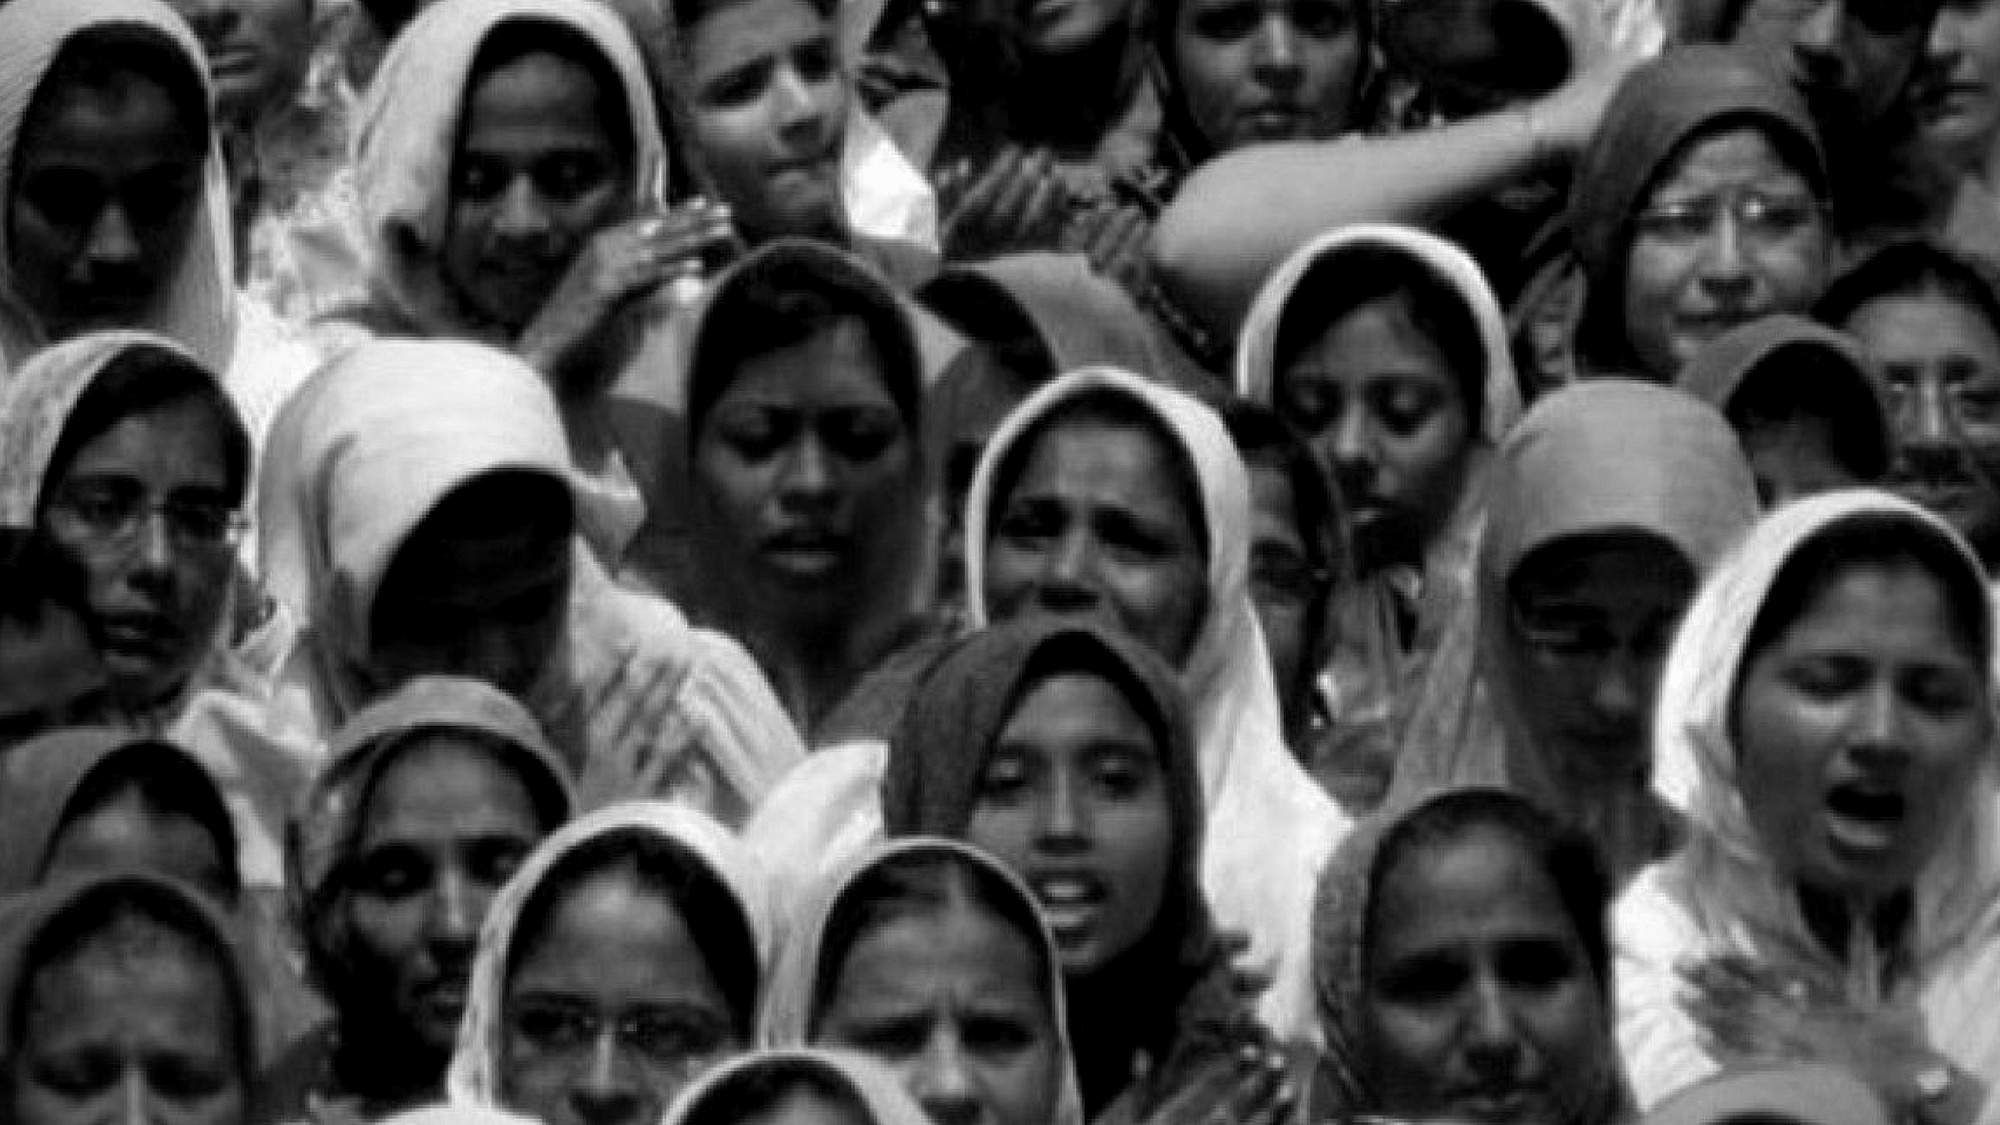 Not much has changed on the ground, in terms of female genital mutilation. (Photo Courtesy: <a href="https://sahiyo.com/2016/03/09/i-am-a-bohra-photo-campaign/">sahiyo.com</a>)